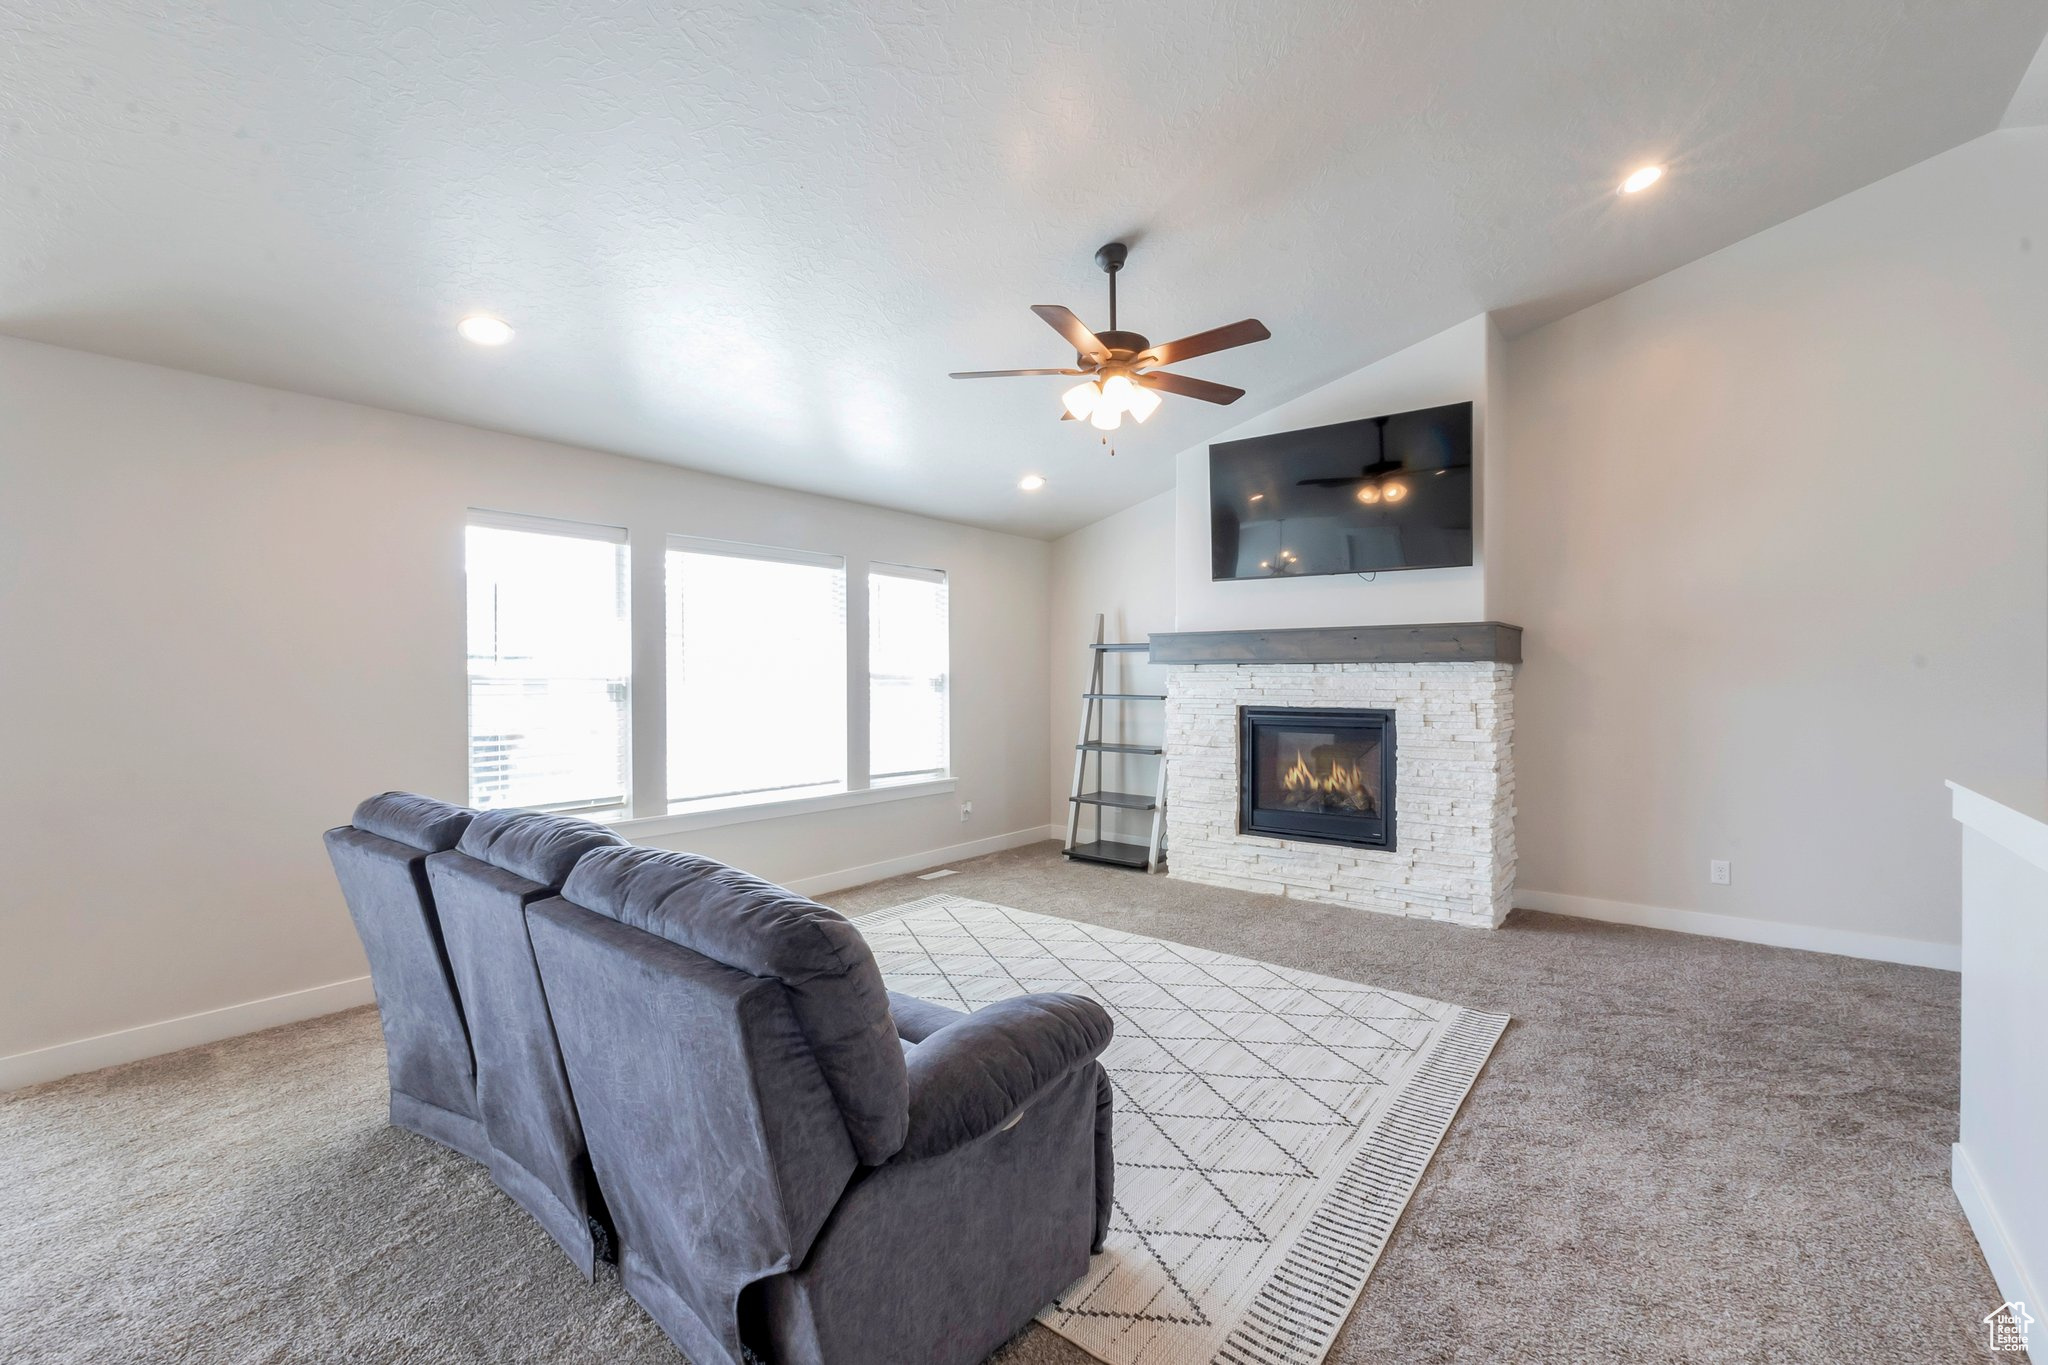 Living room featuring ceiling fan, light carpet, a fireplace, and lofted ceiling